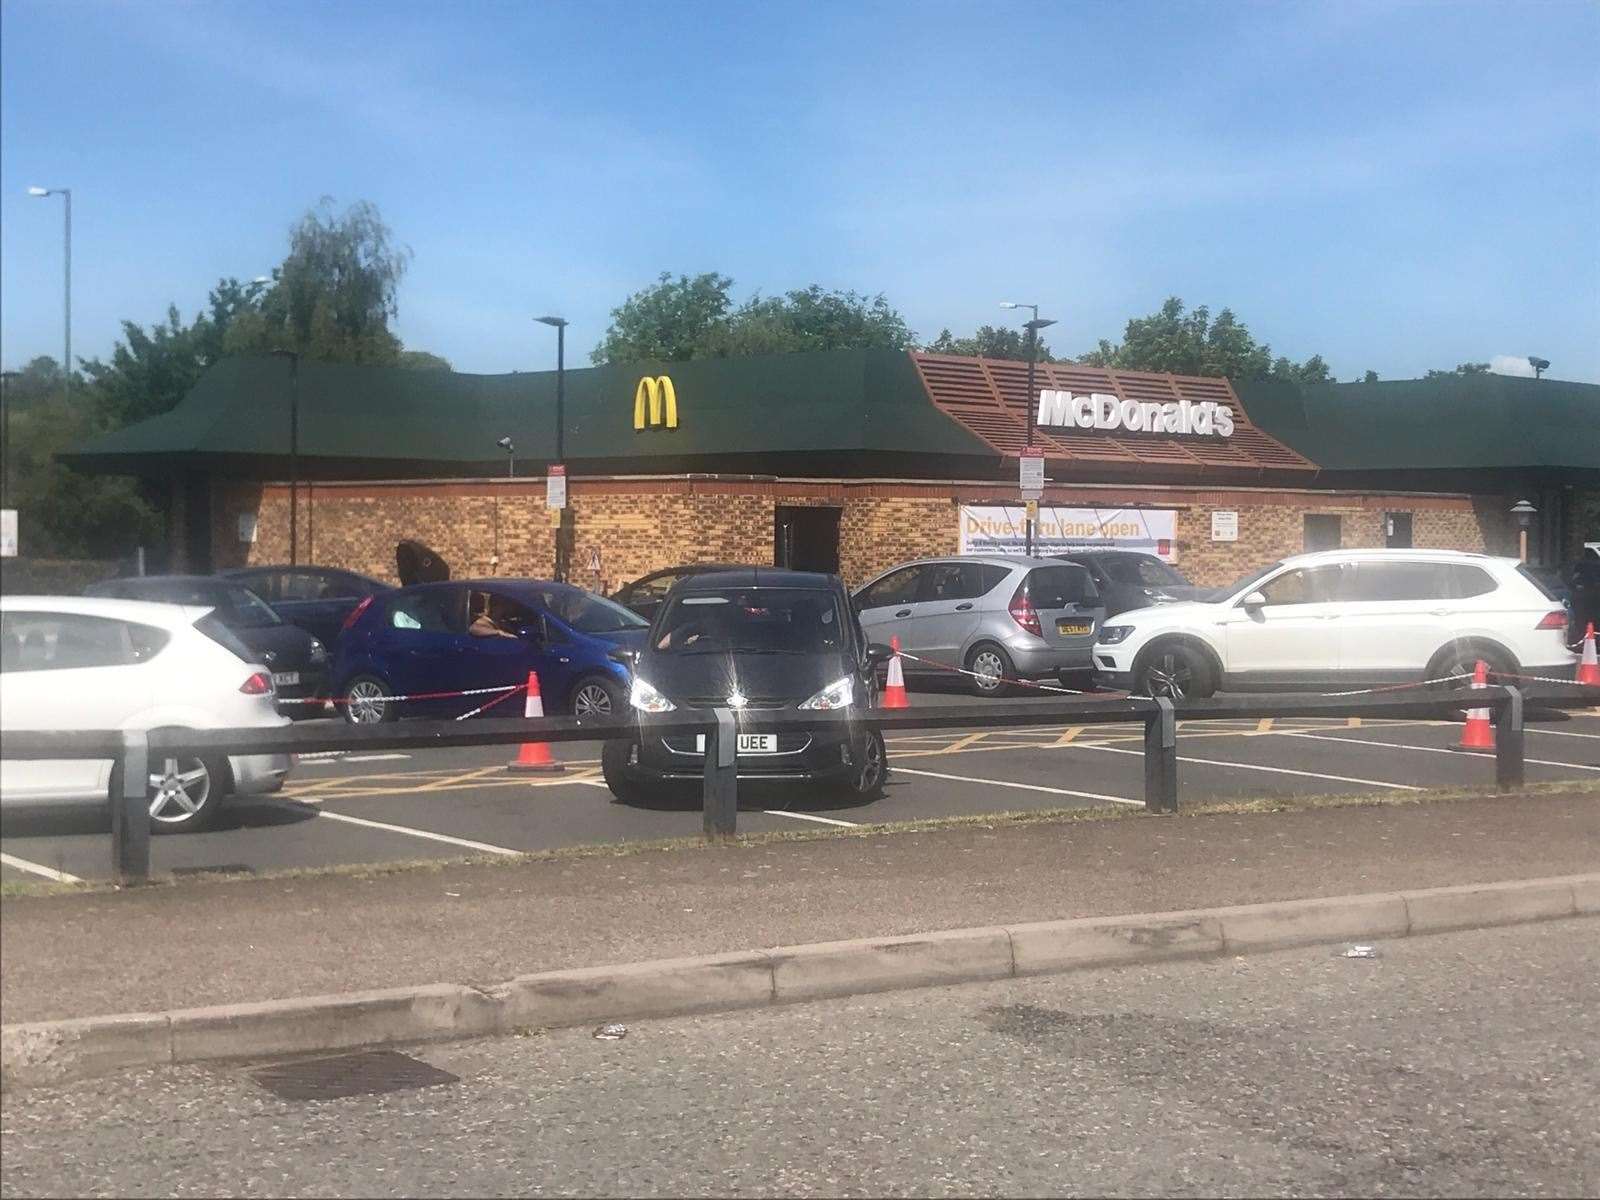 Huge queues at the drive thru in Strood when it reopened last week